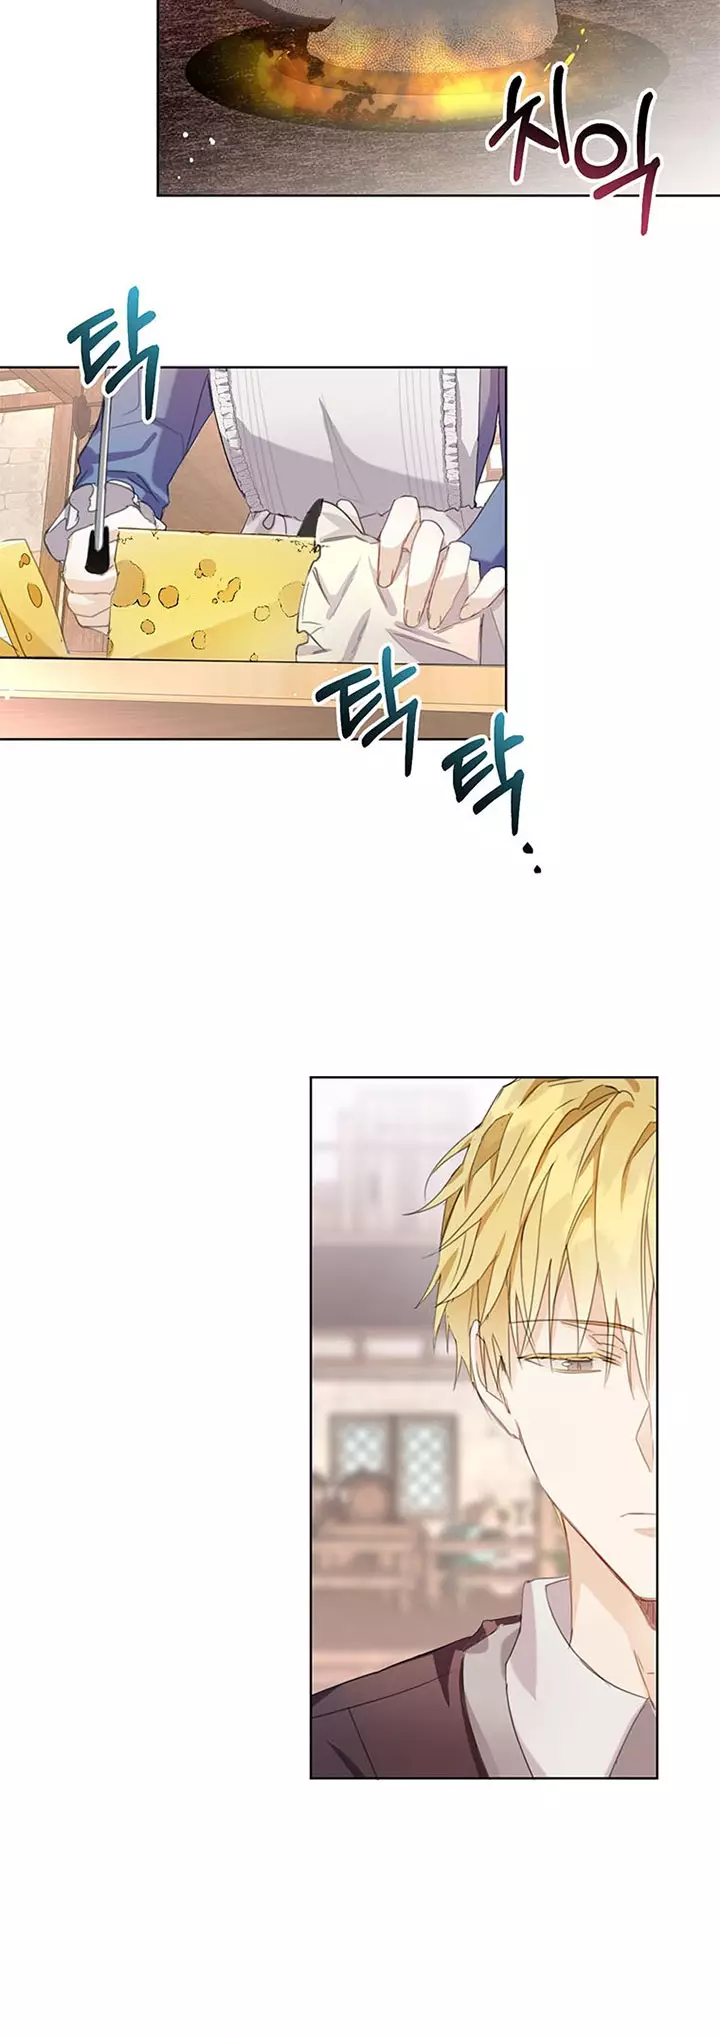 The Bad Ending Of The Otome Game - 7 page 12-5f454f0e